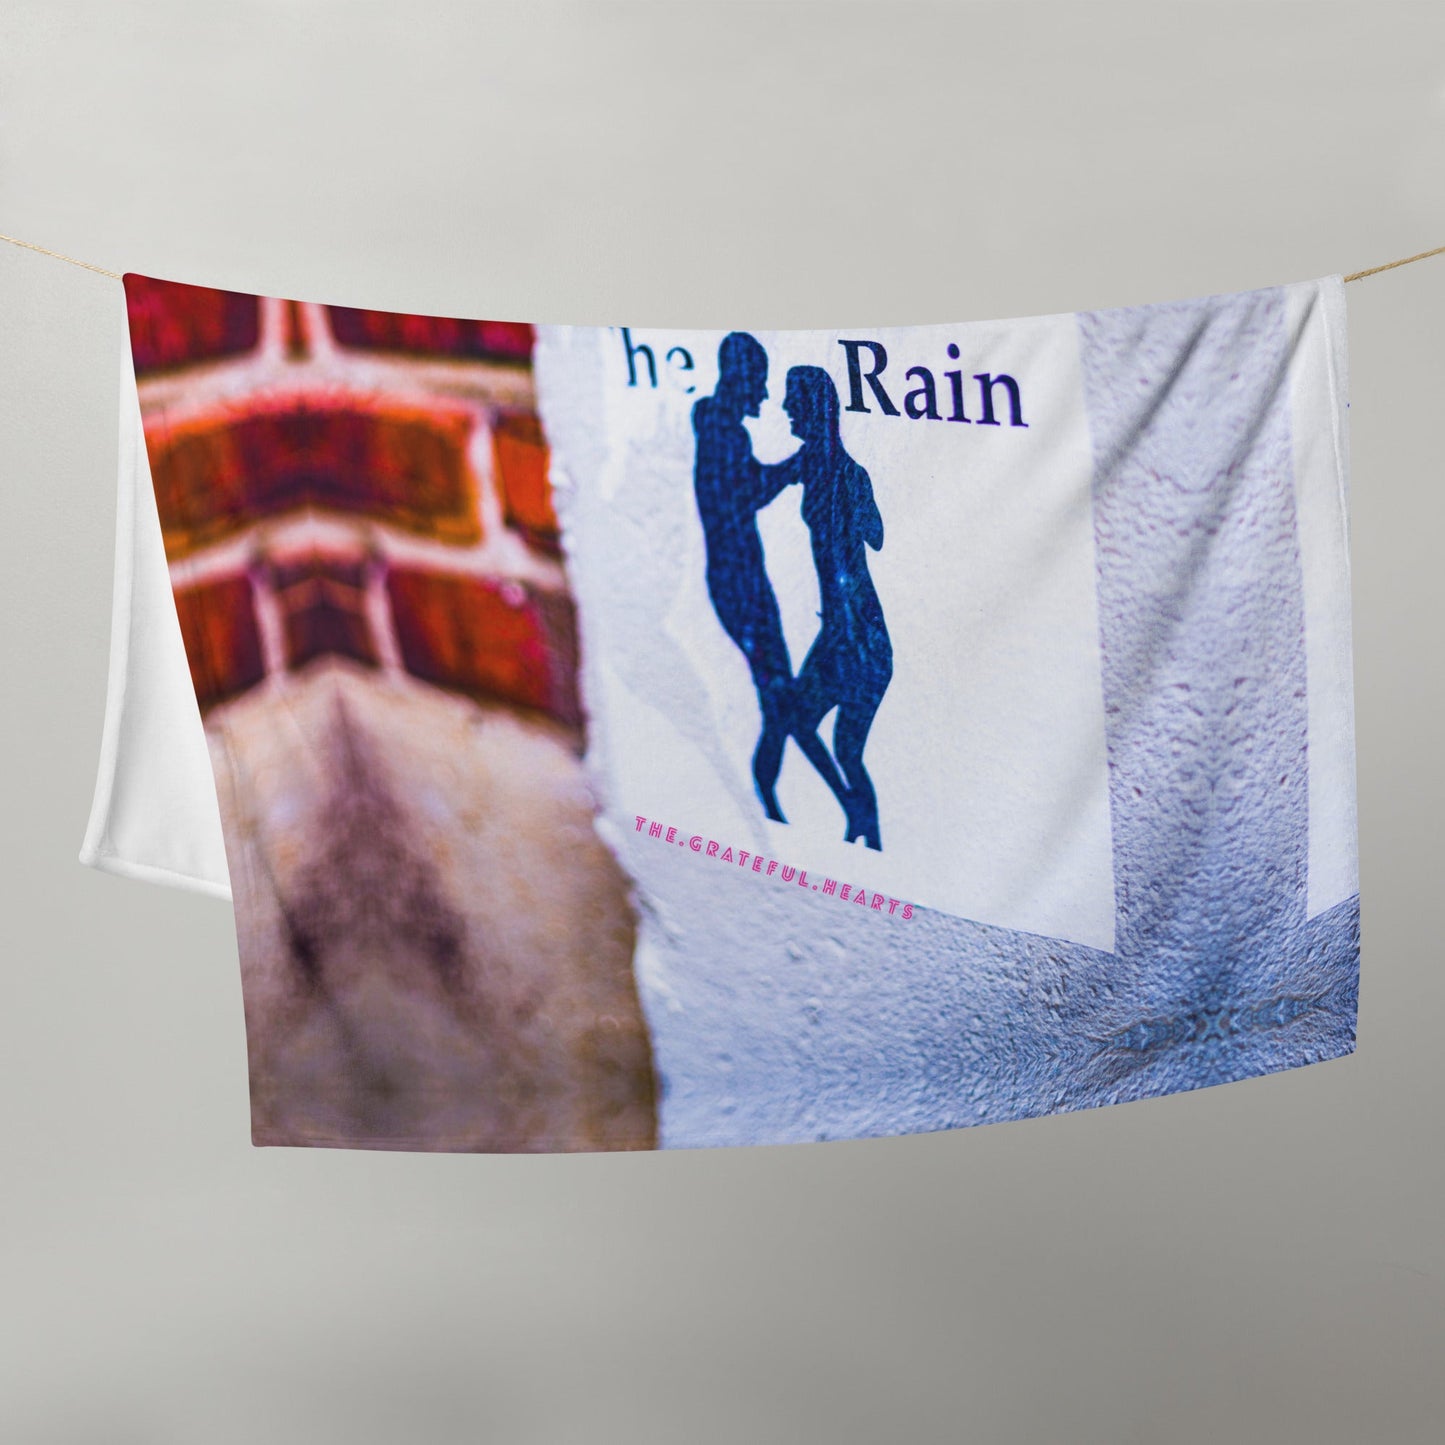 Lets Fall In Love And Dance In The Rain Throw Blanket - The Grateful Hearts